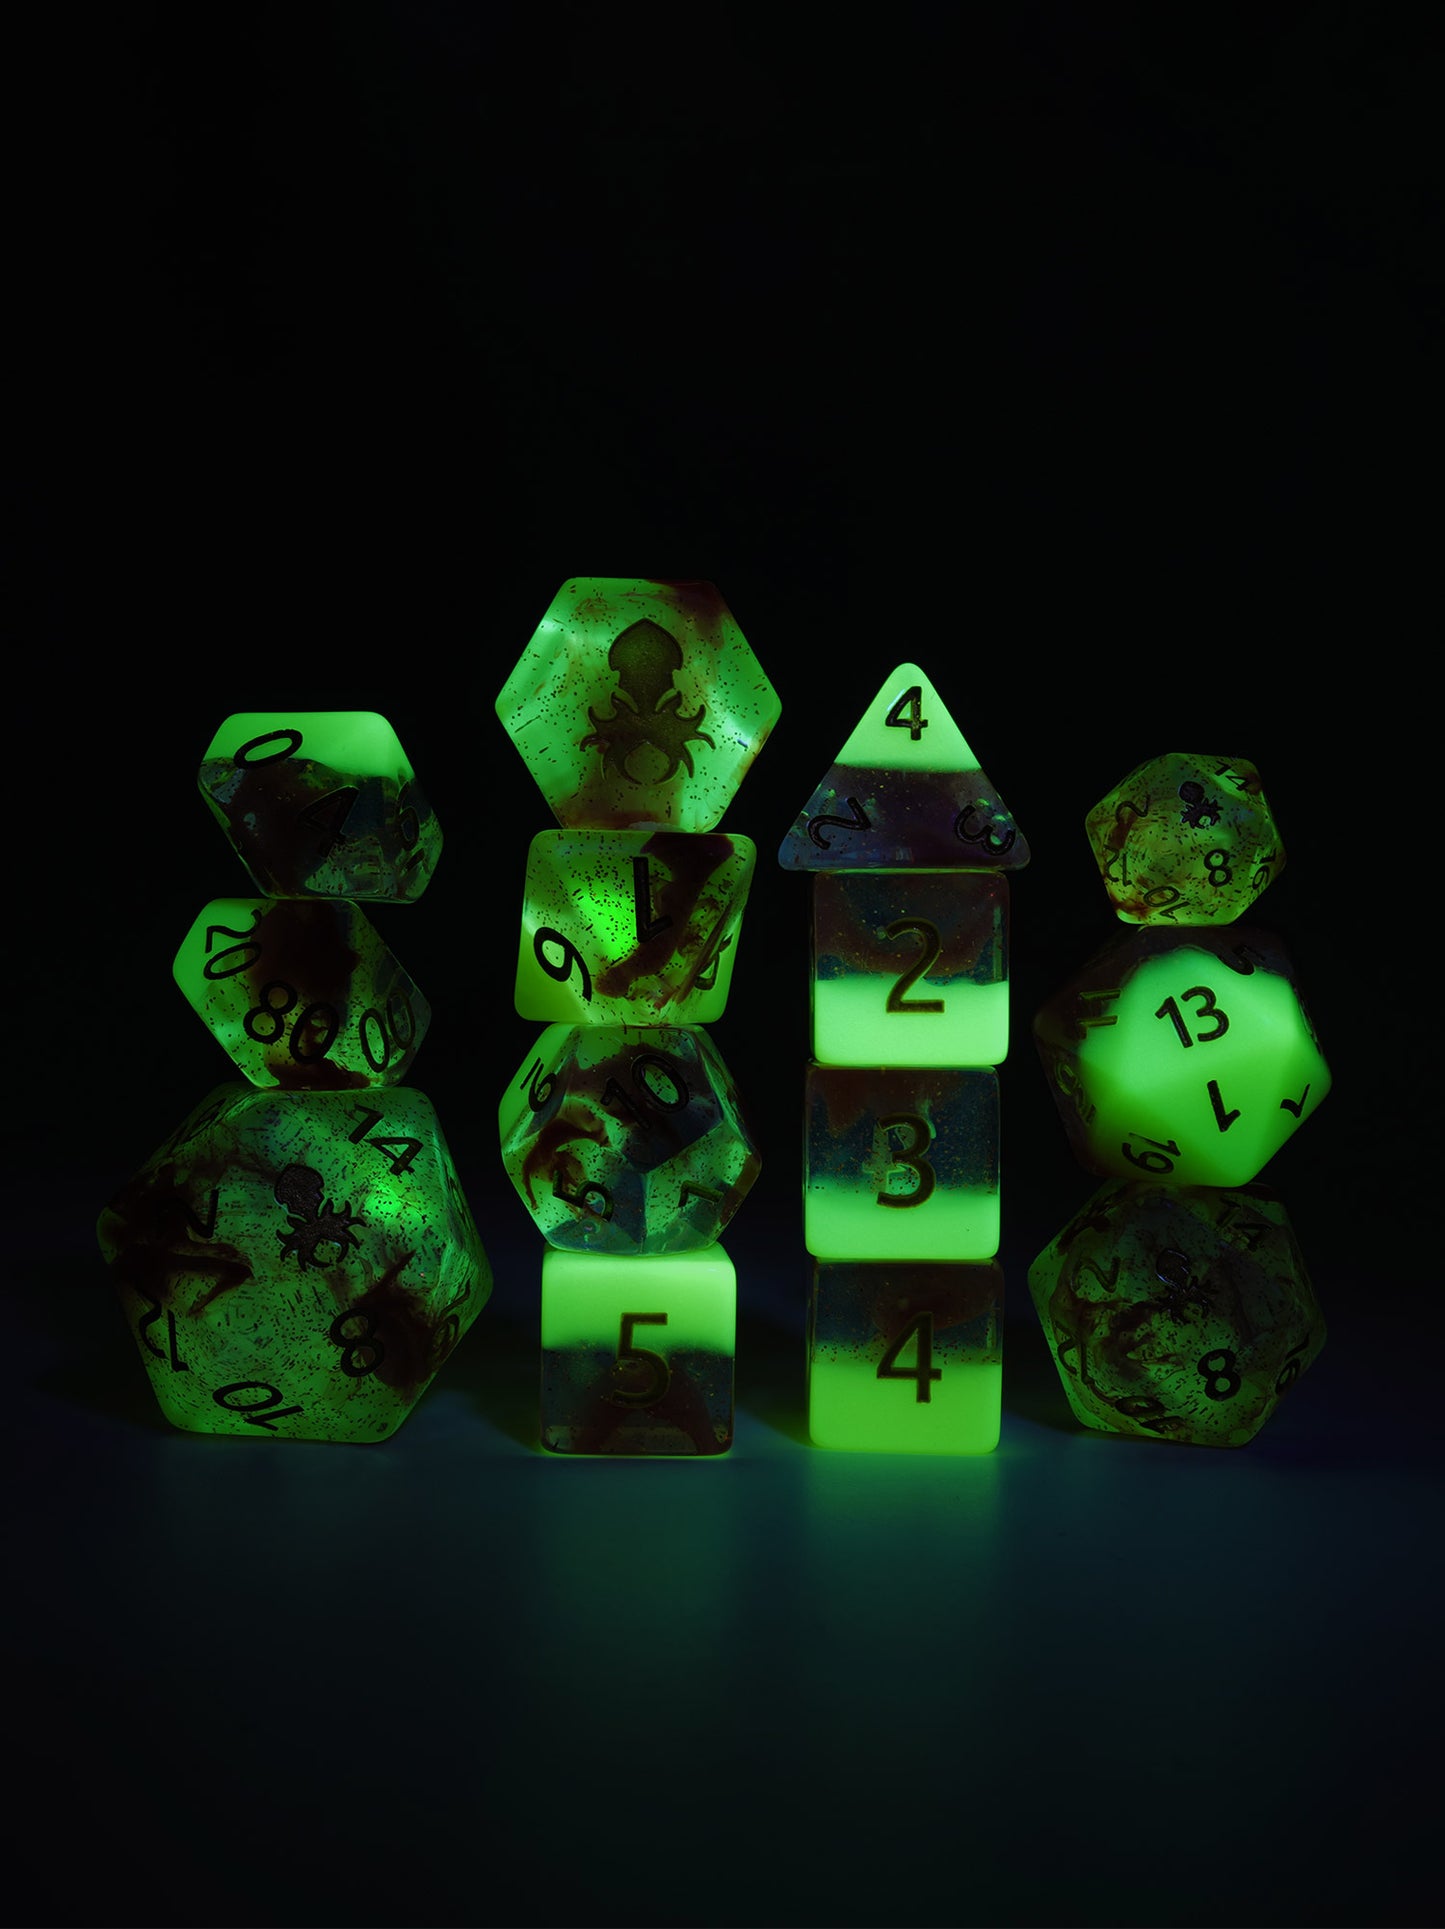 Magmaflow 2 14pc Glow in the Dark Dice Set inked in Gold